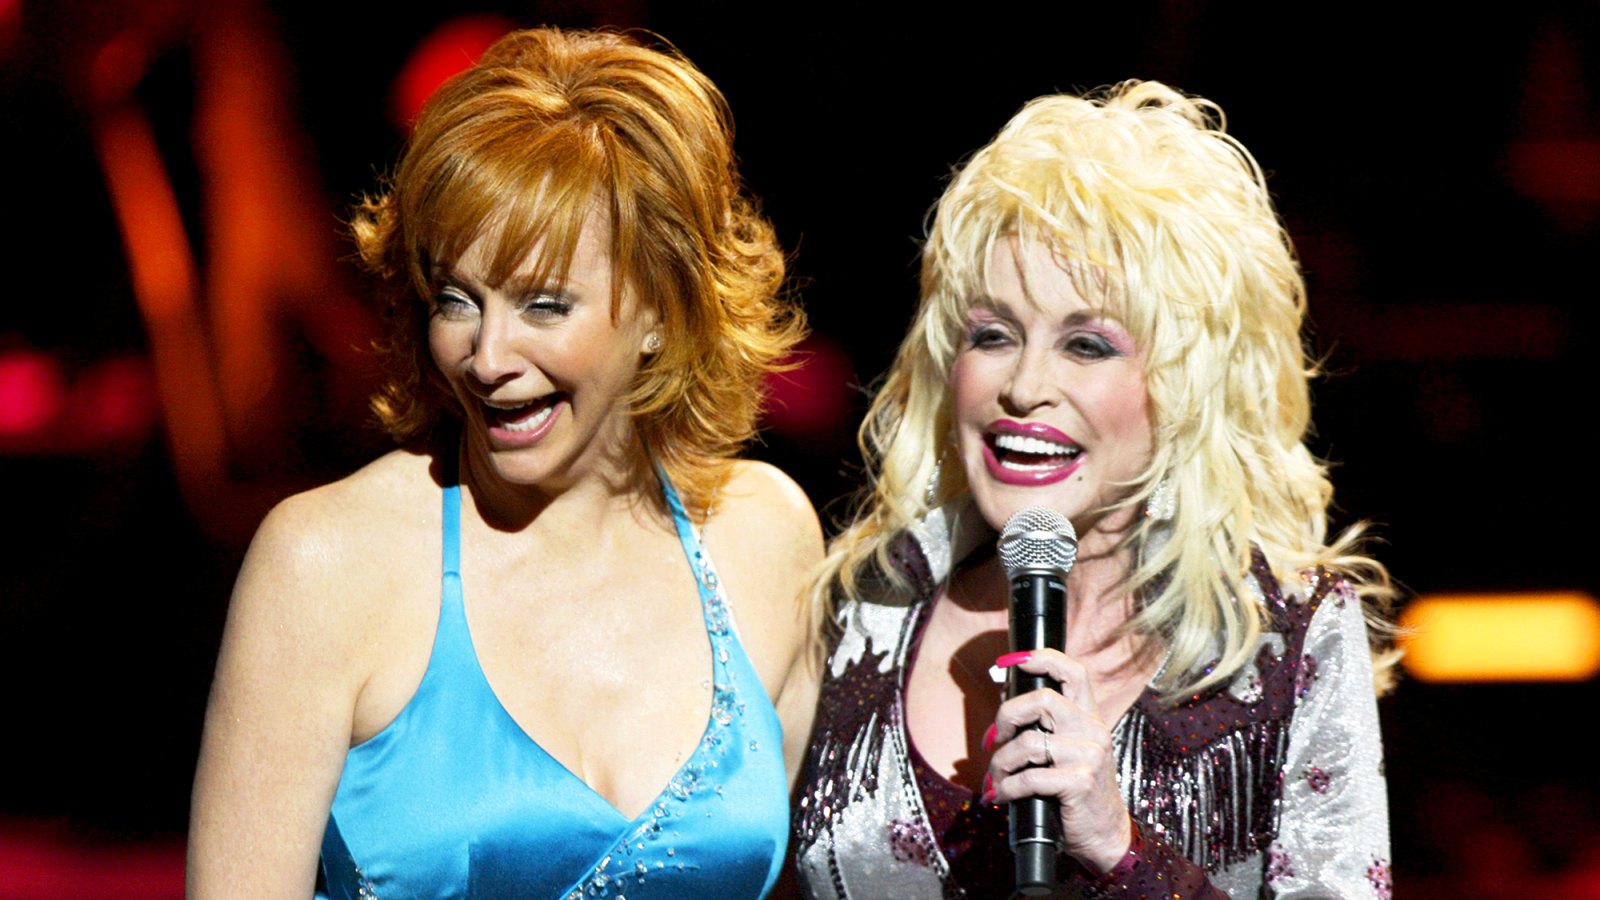 Reba McEntire and Dolly Parton during the 2016 CMT Giants show at Kodak Theater in Hollywood, California.